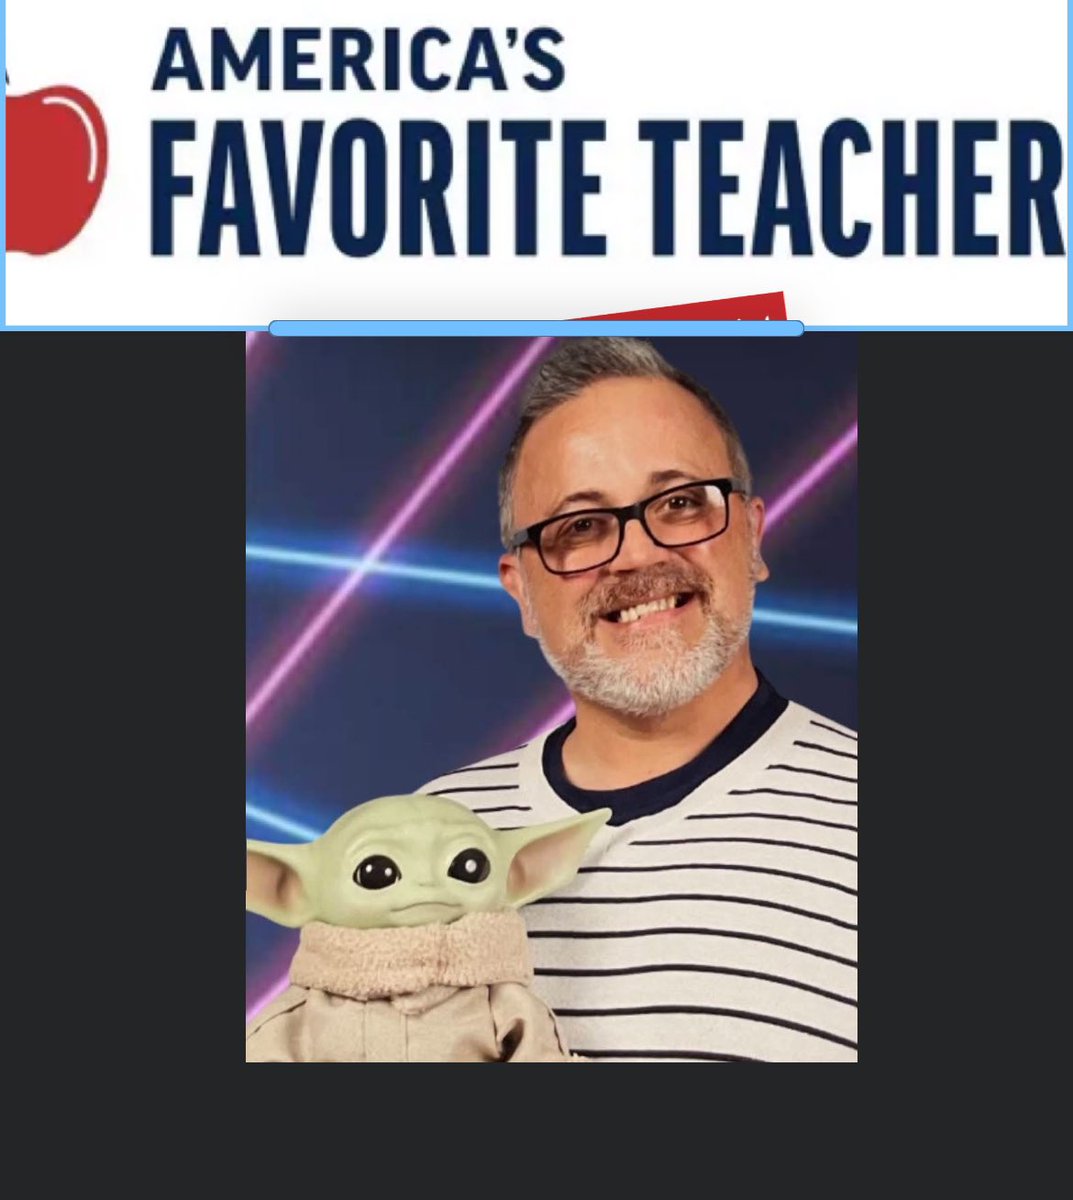 There’s a chance this could be my last school picture for a long time. If so, what a way to finish. There’s still time to vote in the #AmericasFavoriteTeacher contest! 

americasfavteacher.org/2024/toby-price